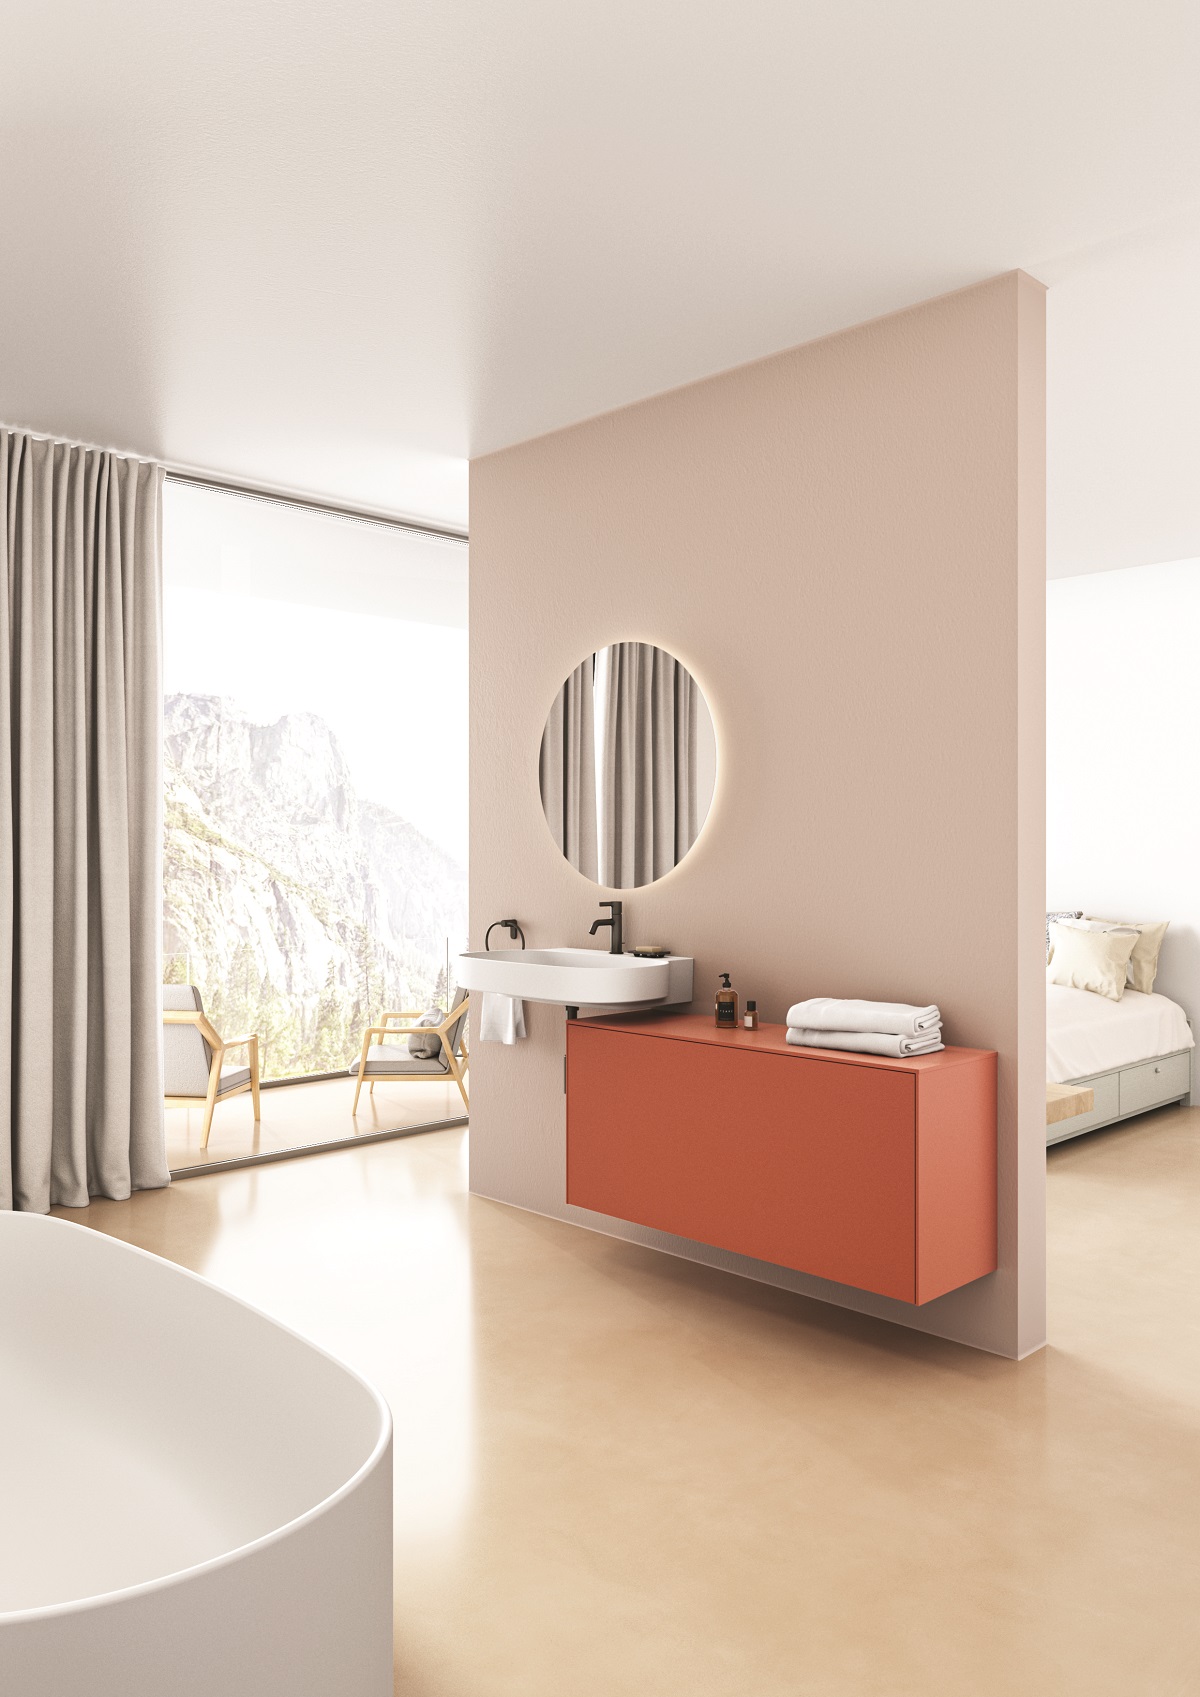 Ideal Standard Linda-X with orange cabinet in the bathroom